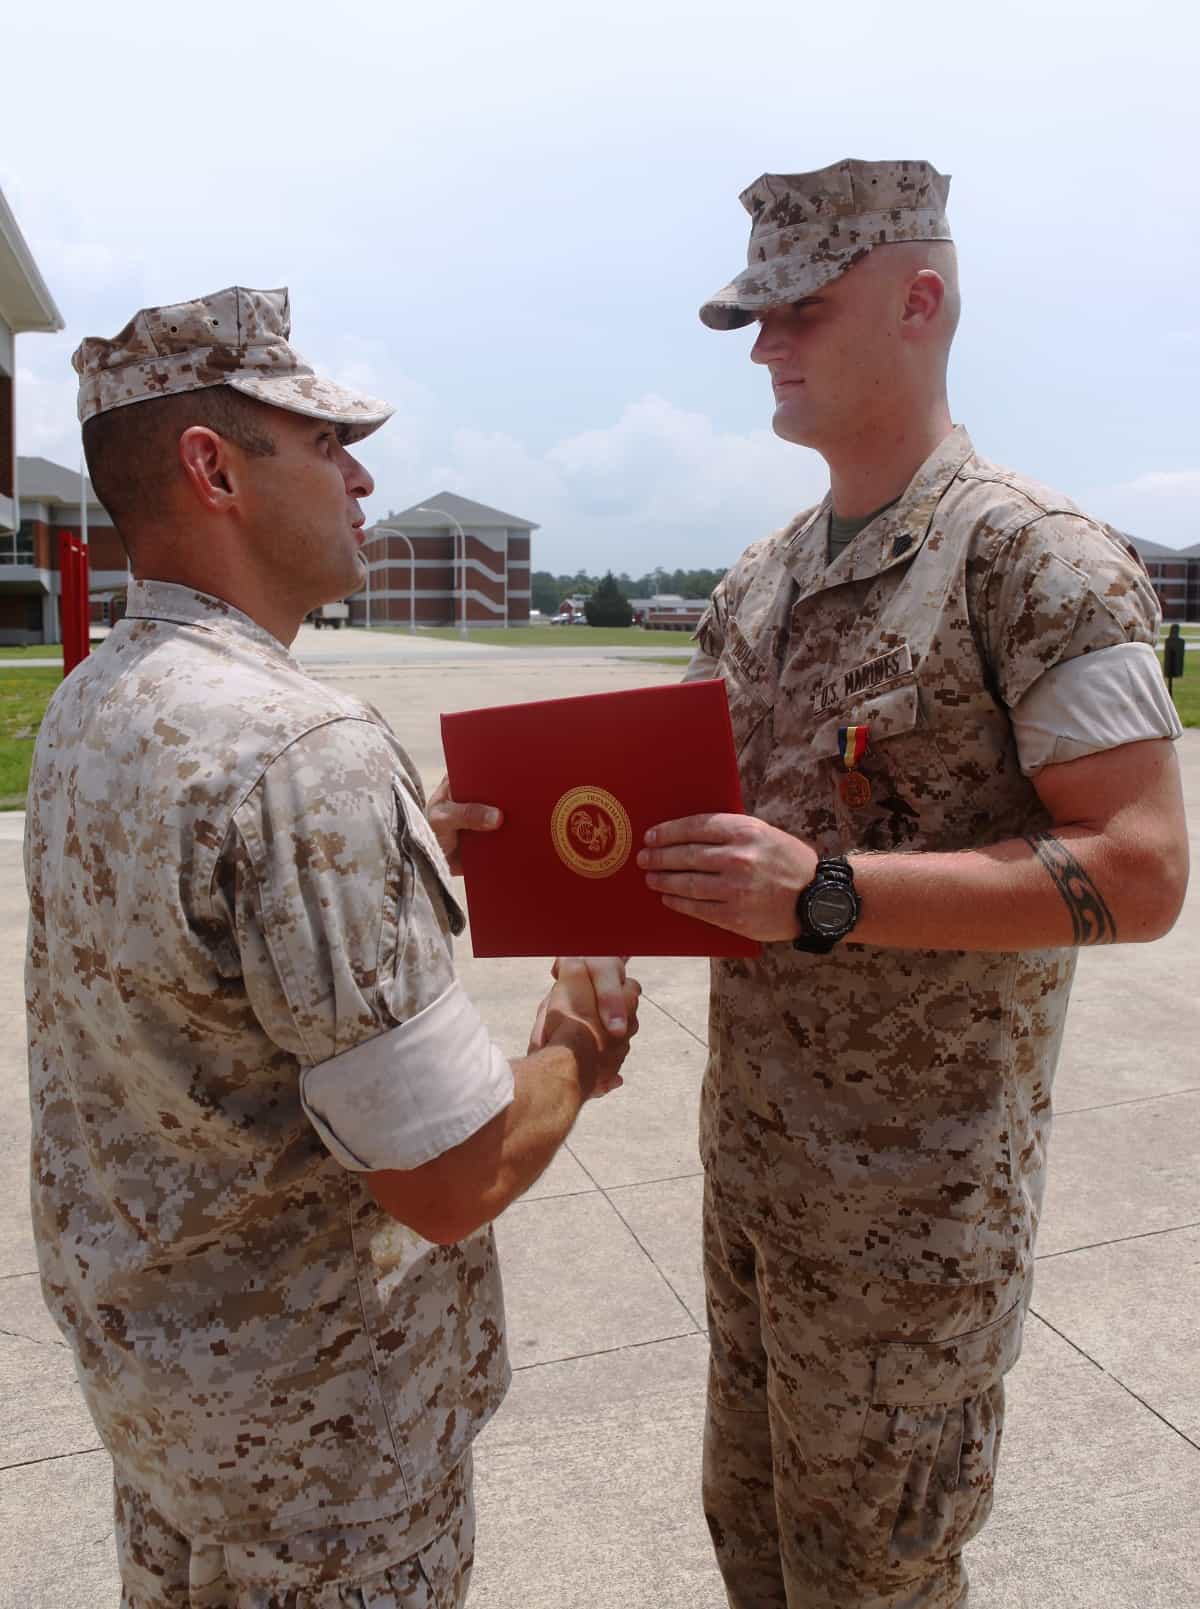 Sgt. William Holls who saved a Marine's life during grenade training